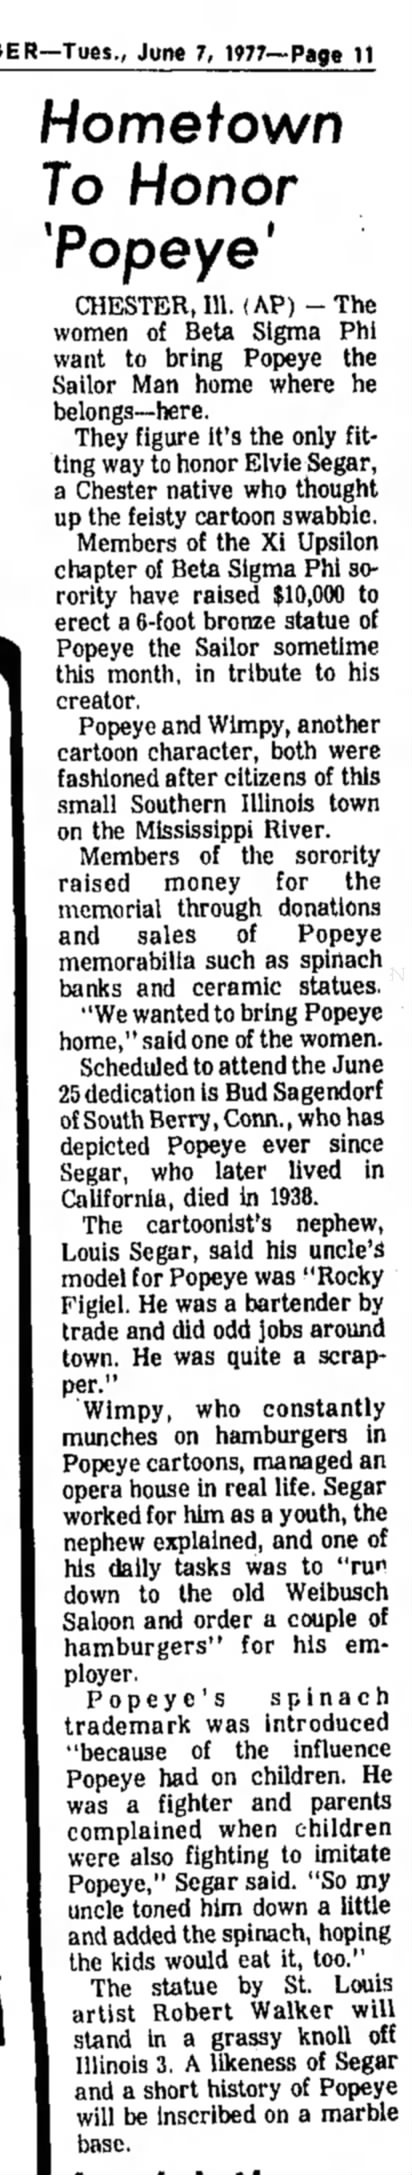 Popeye statue to be erected